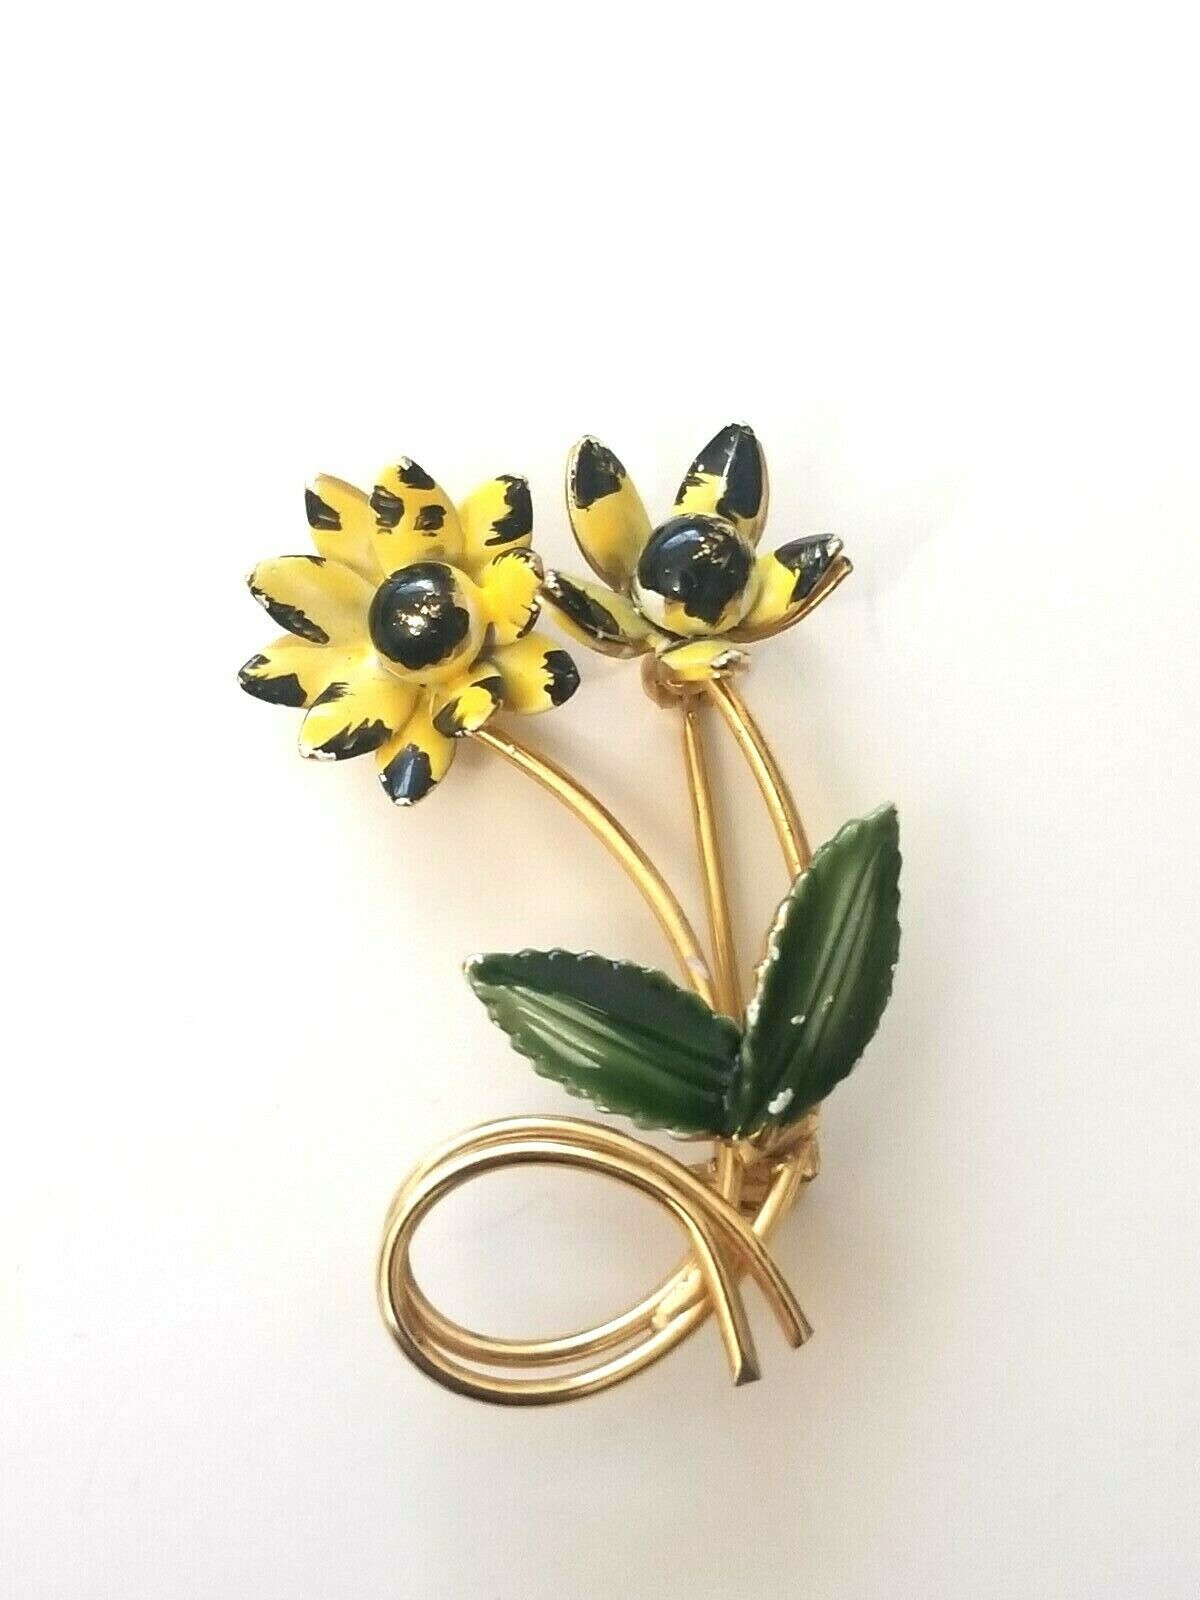 Primary image for Vintage Enamel Flower Stem Brooch Pin Gold Tone Flowers Leaves Yellow Green...